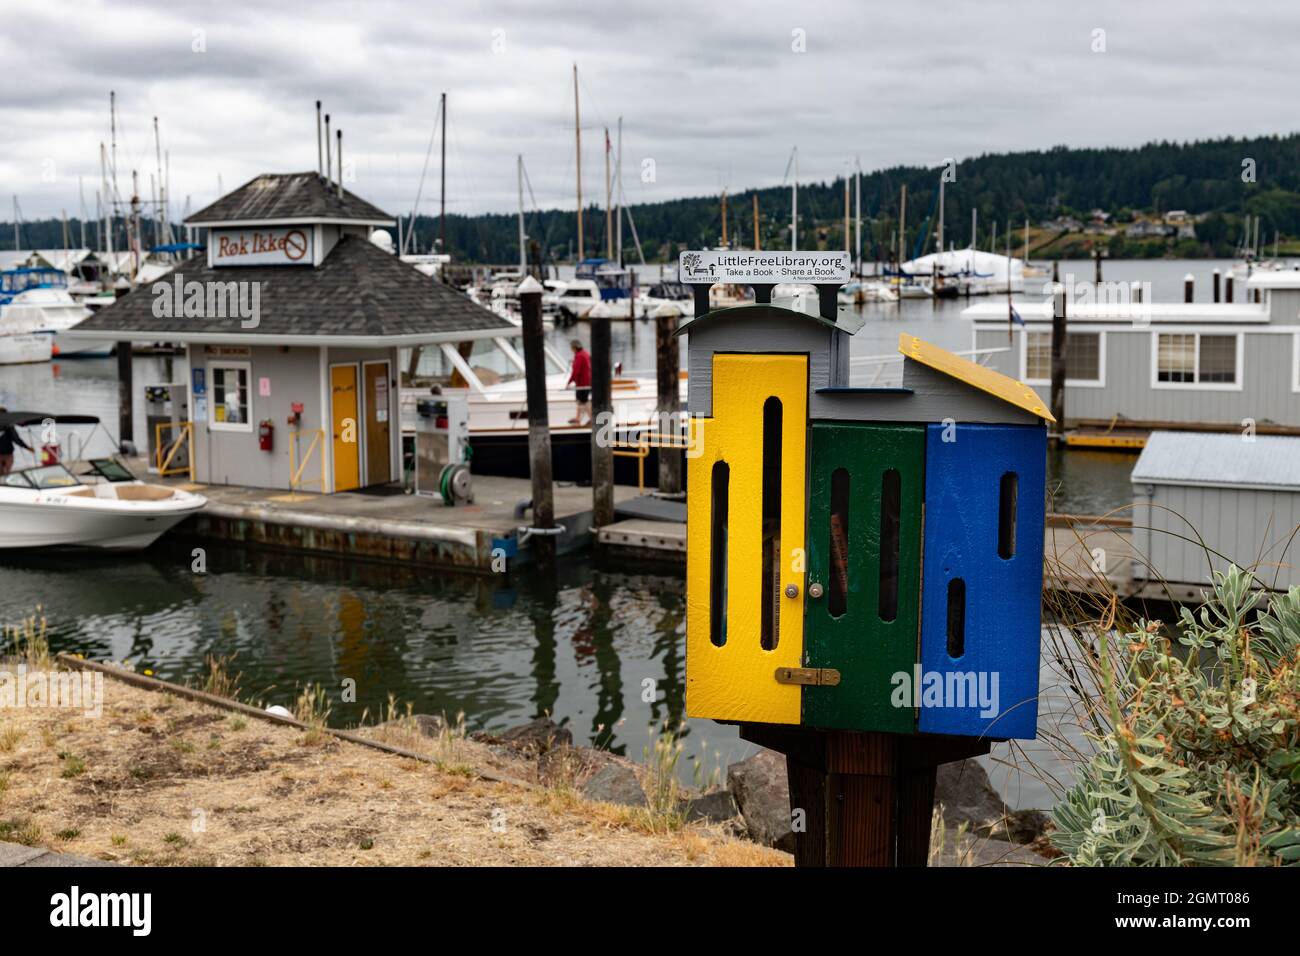 Colorful Free Lending Library Next to a Marina Stock Photo